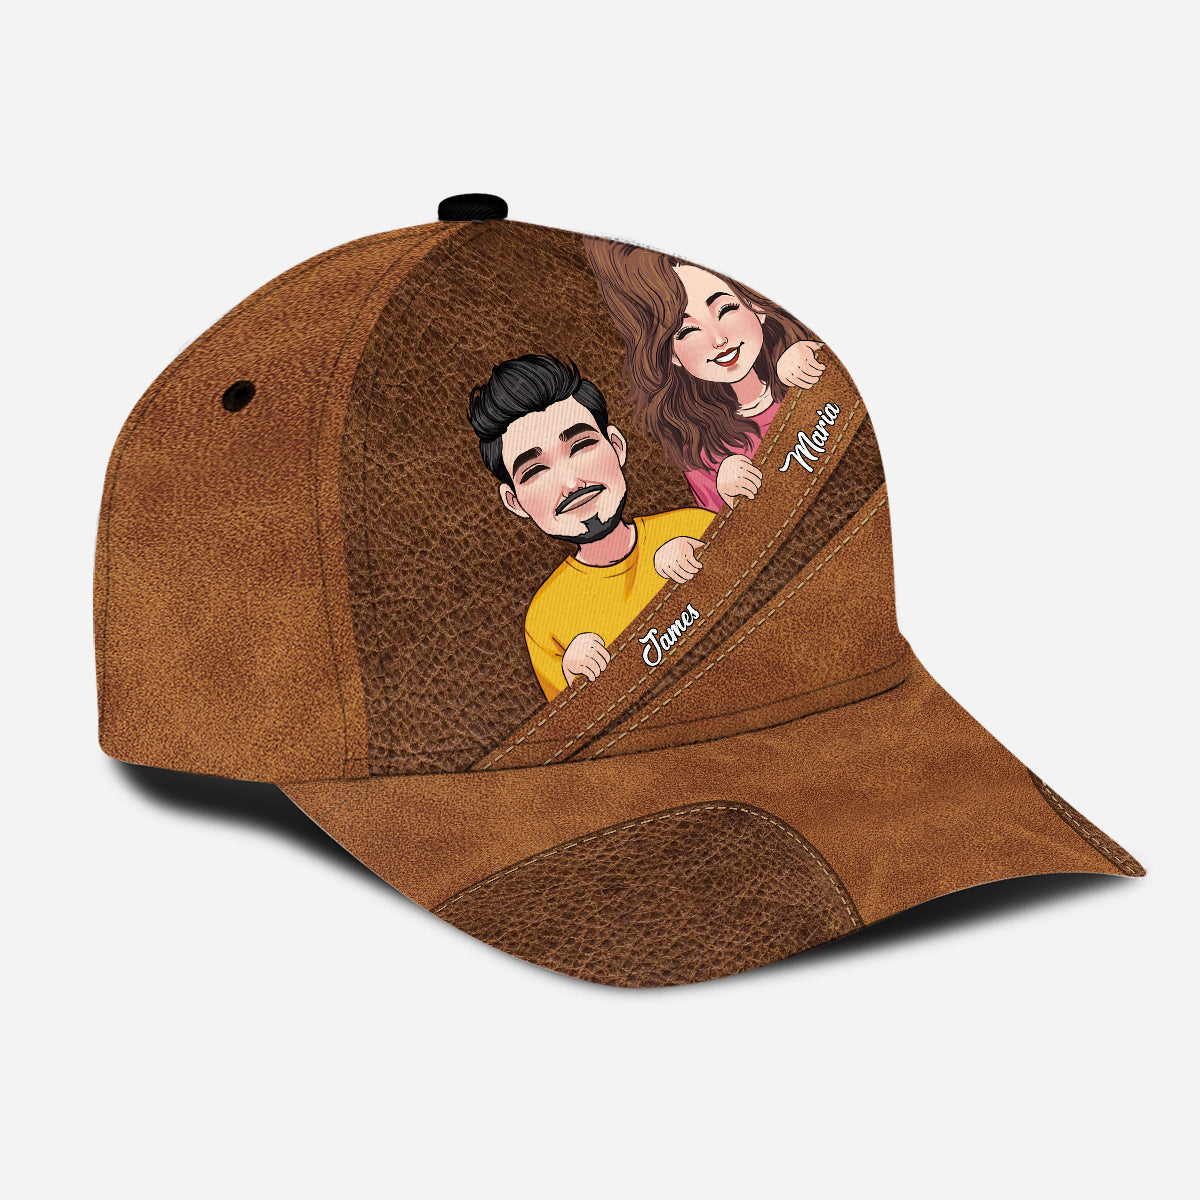 Together Since - Personalized Couple Classic Cap